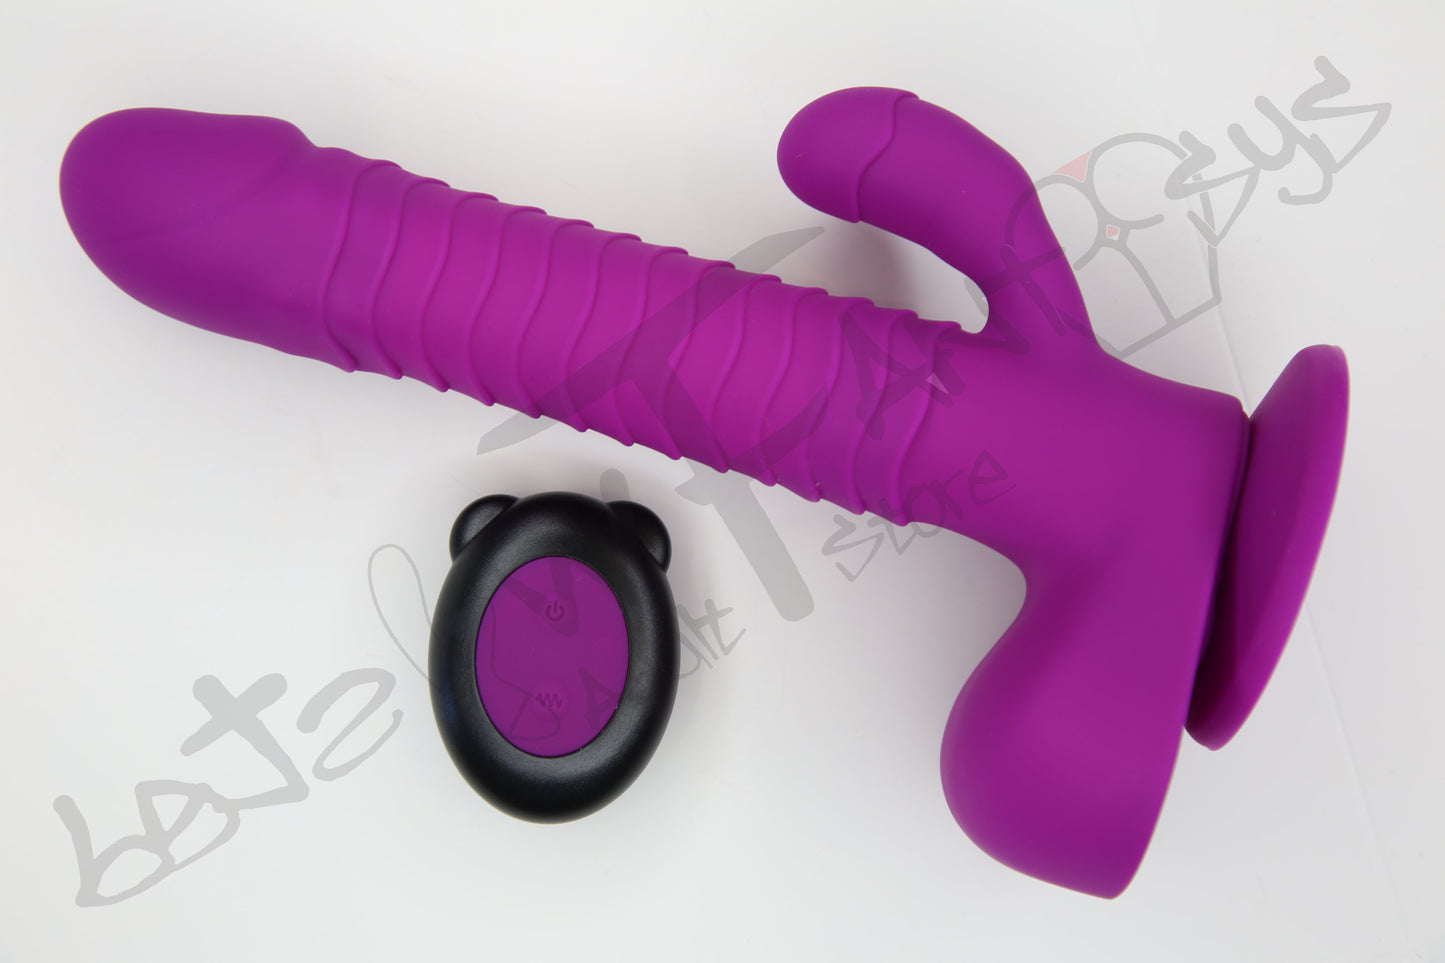 Rotating suction cup remote controlled dildo